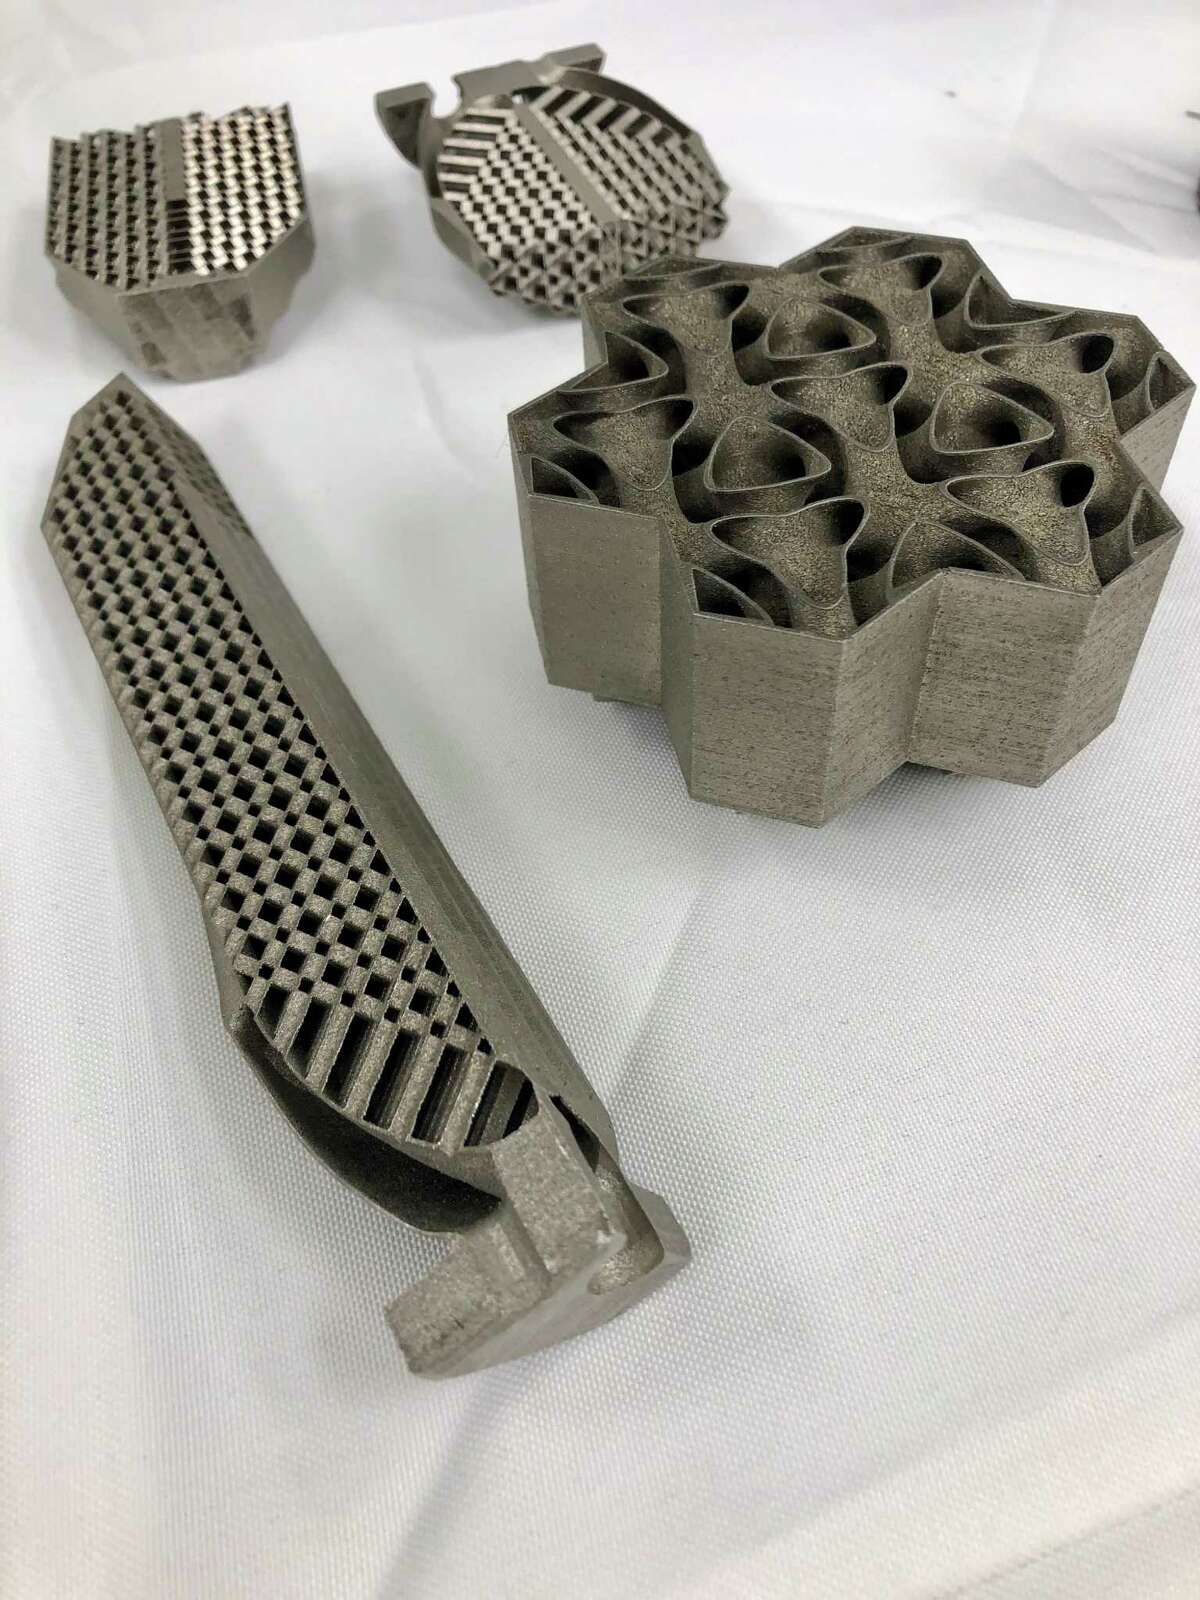 Test samples of 3D-printed heat exchangers made in GE's Additive Manufacturing Lab in Niskayuna. The heat exchanger regulates the airflow over the sorbent materials in the device that GE is developing with leading university scientists across the country,